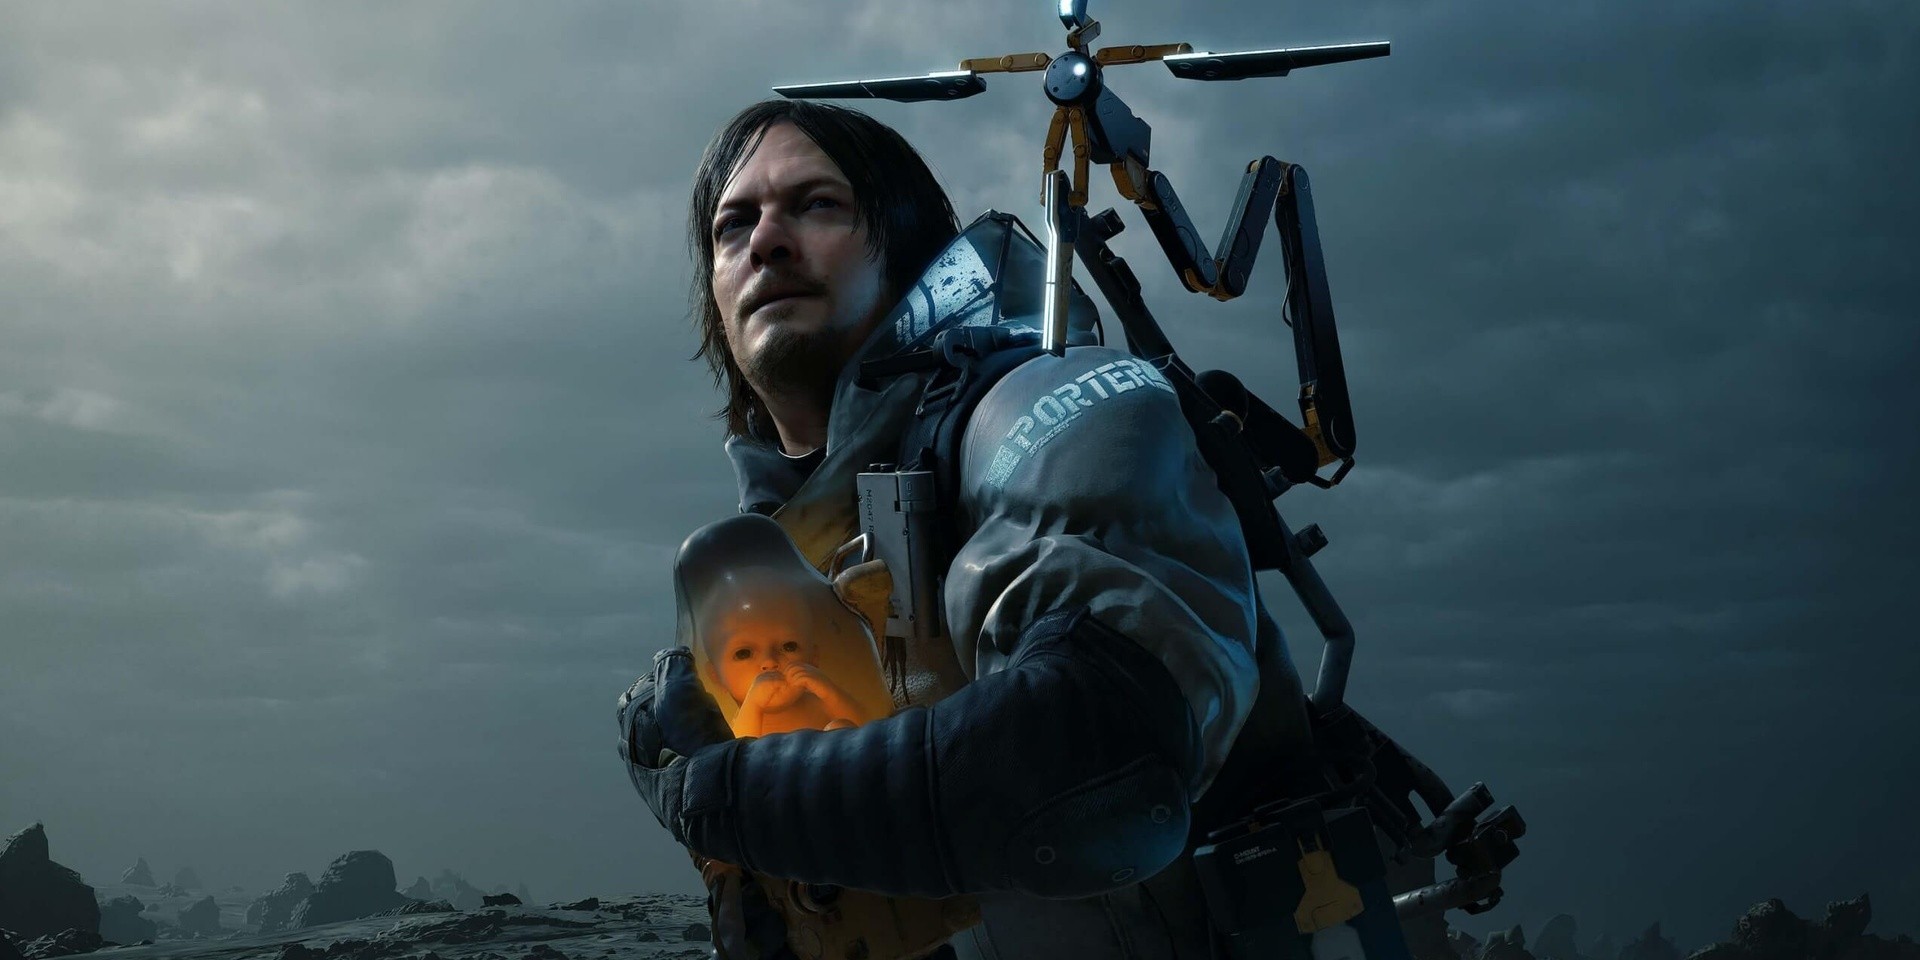 Death Stranding wins Best Music & Score at the 2019 Game Awards